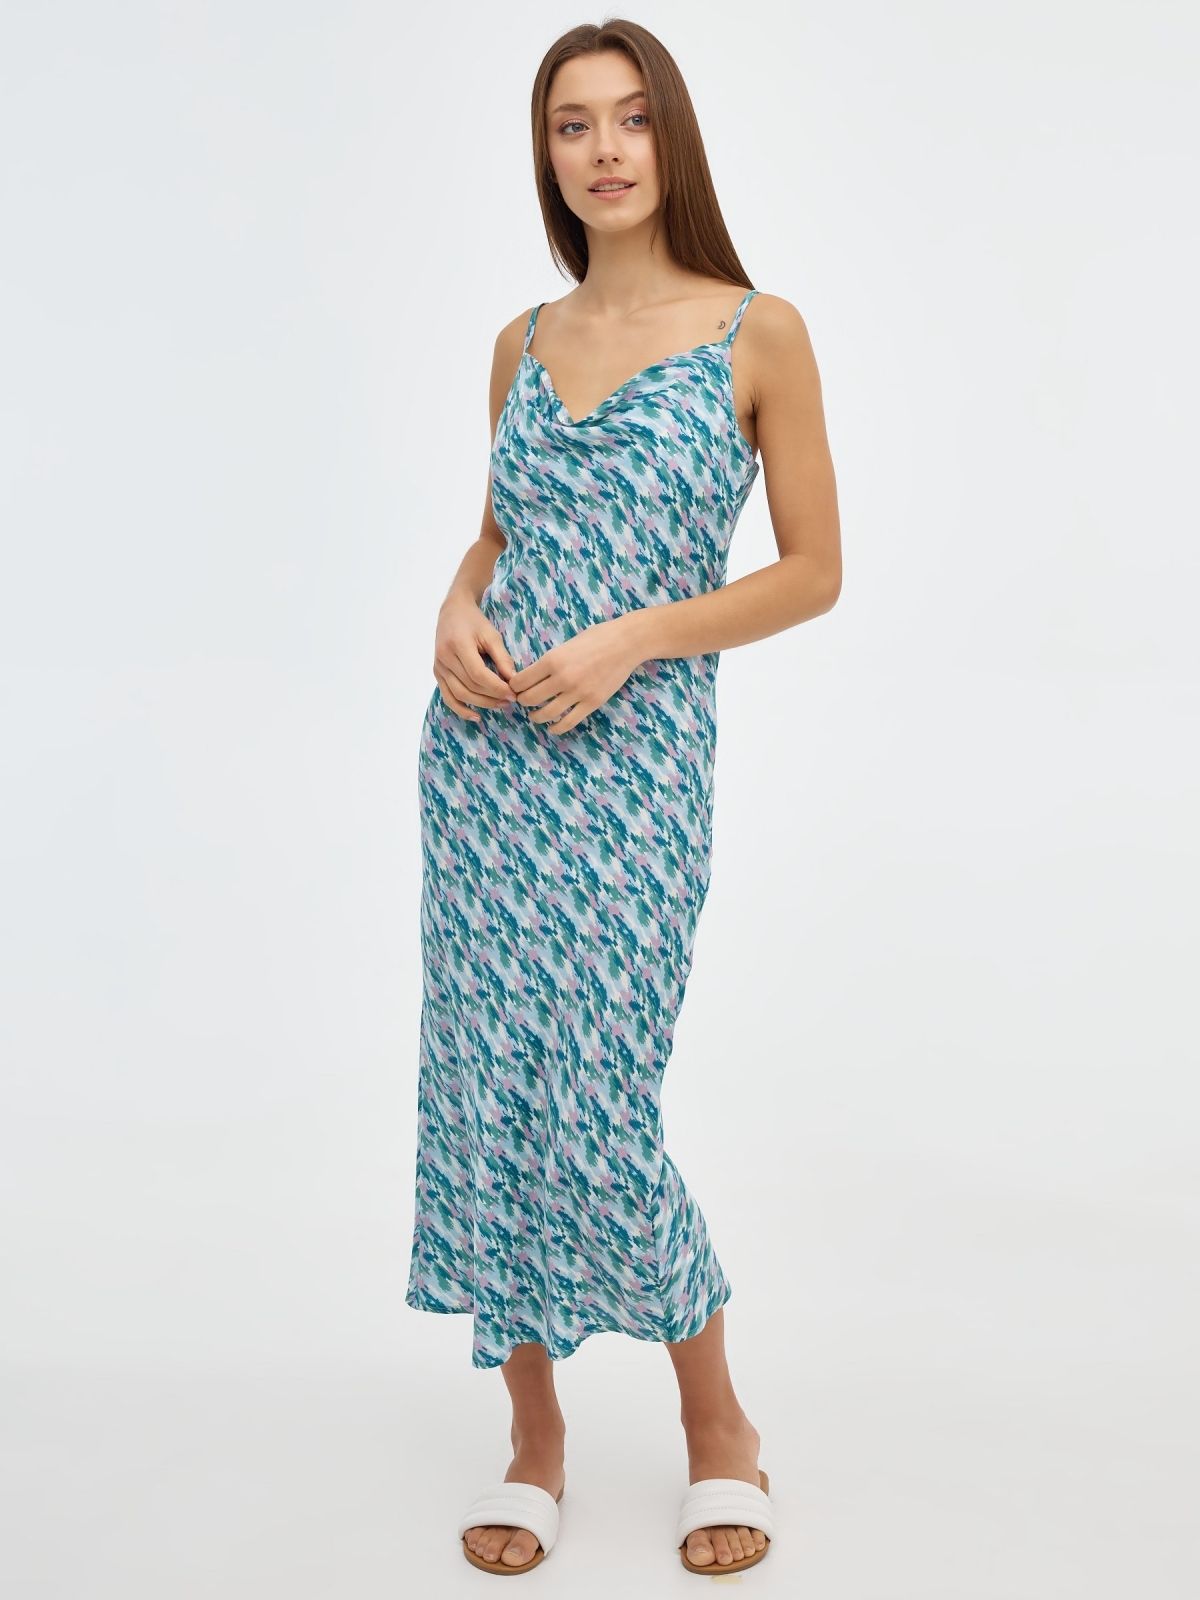 Satin printed midi dress light blue middle front view